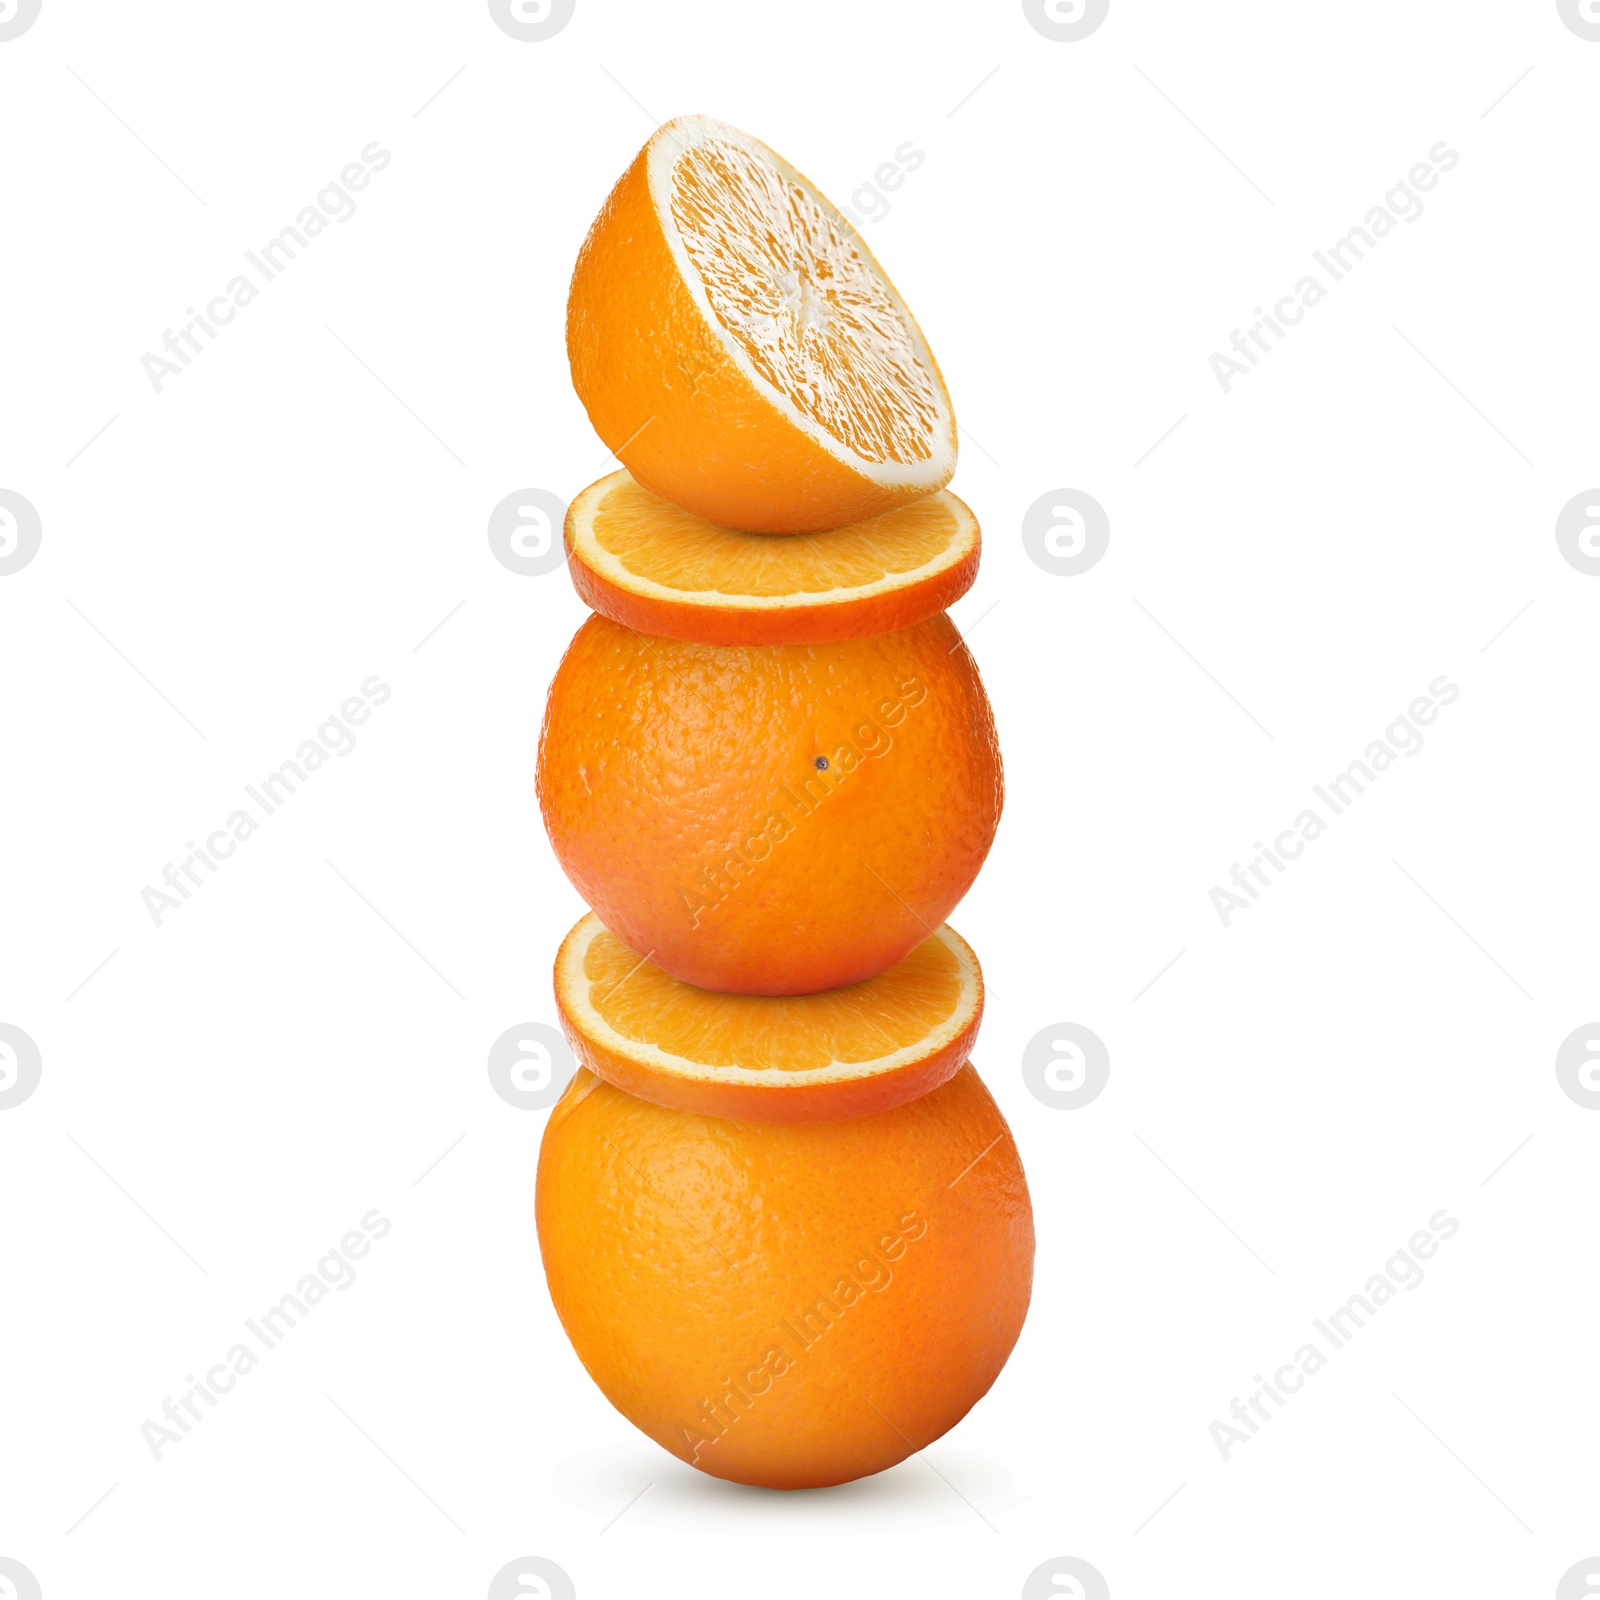 Image of Stacked cut and whole oranges on white background